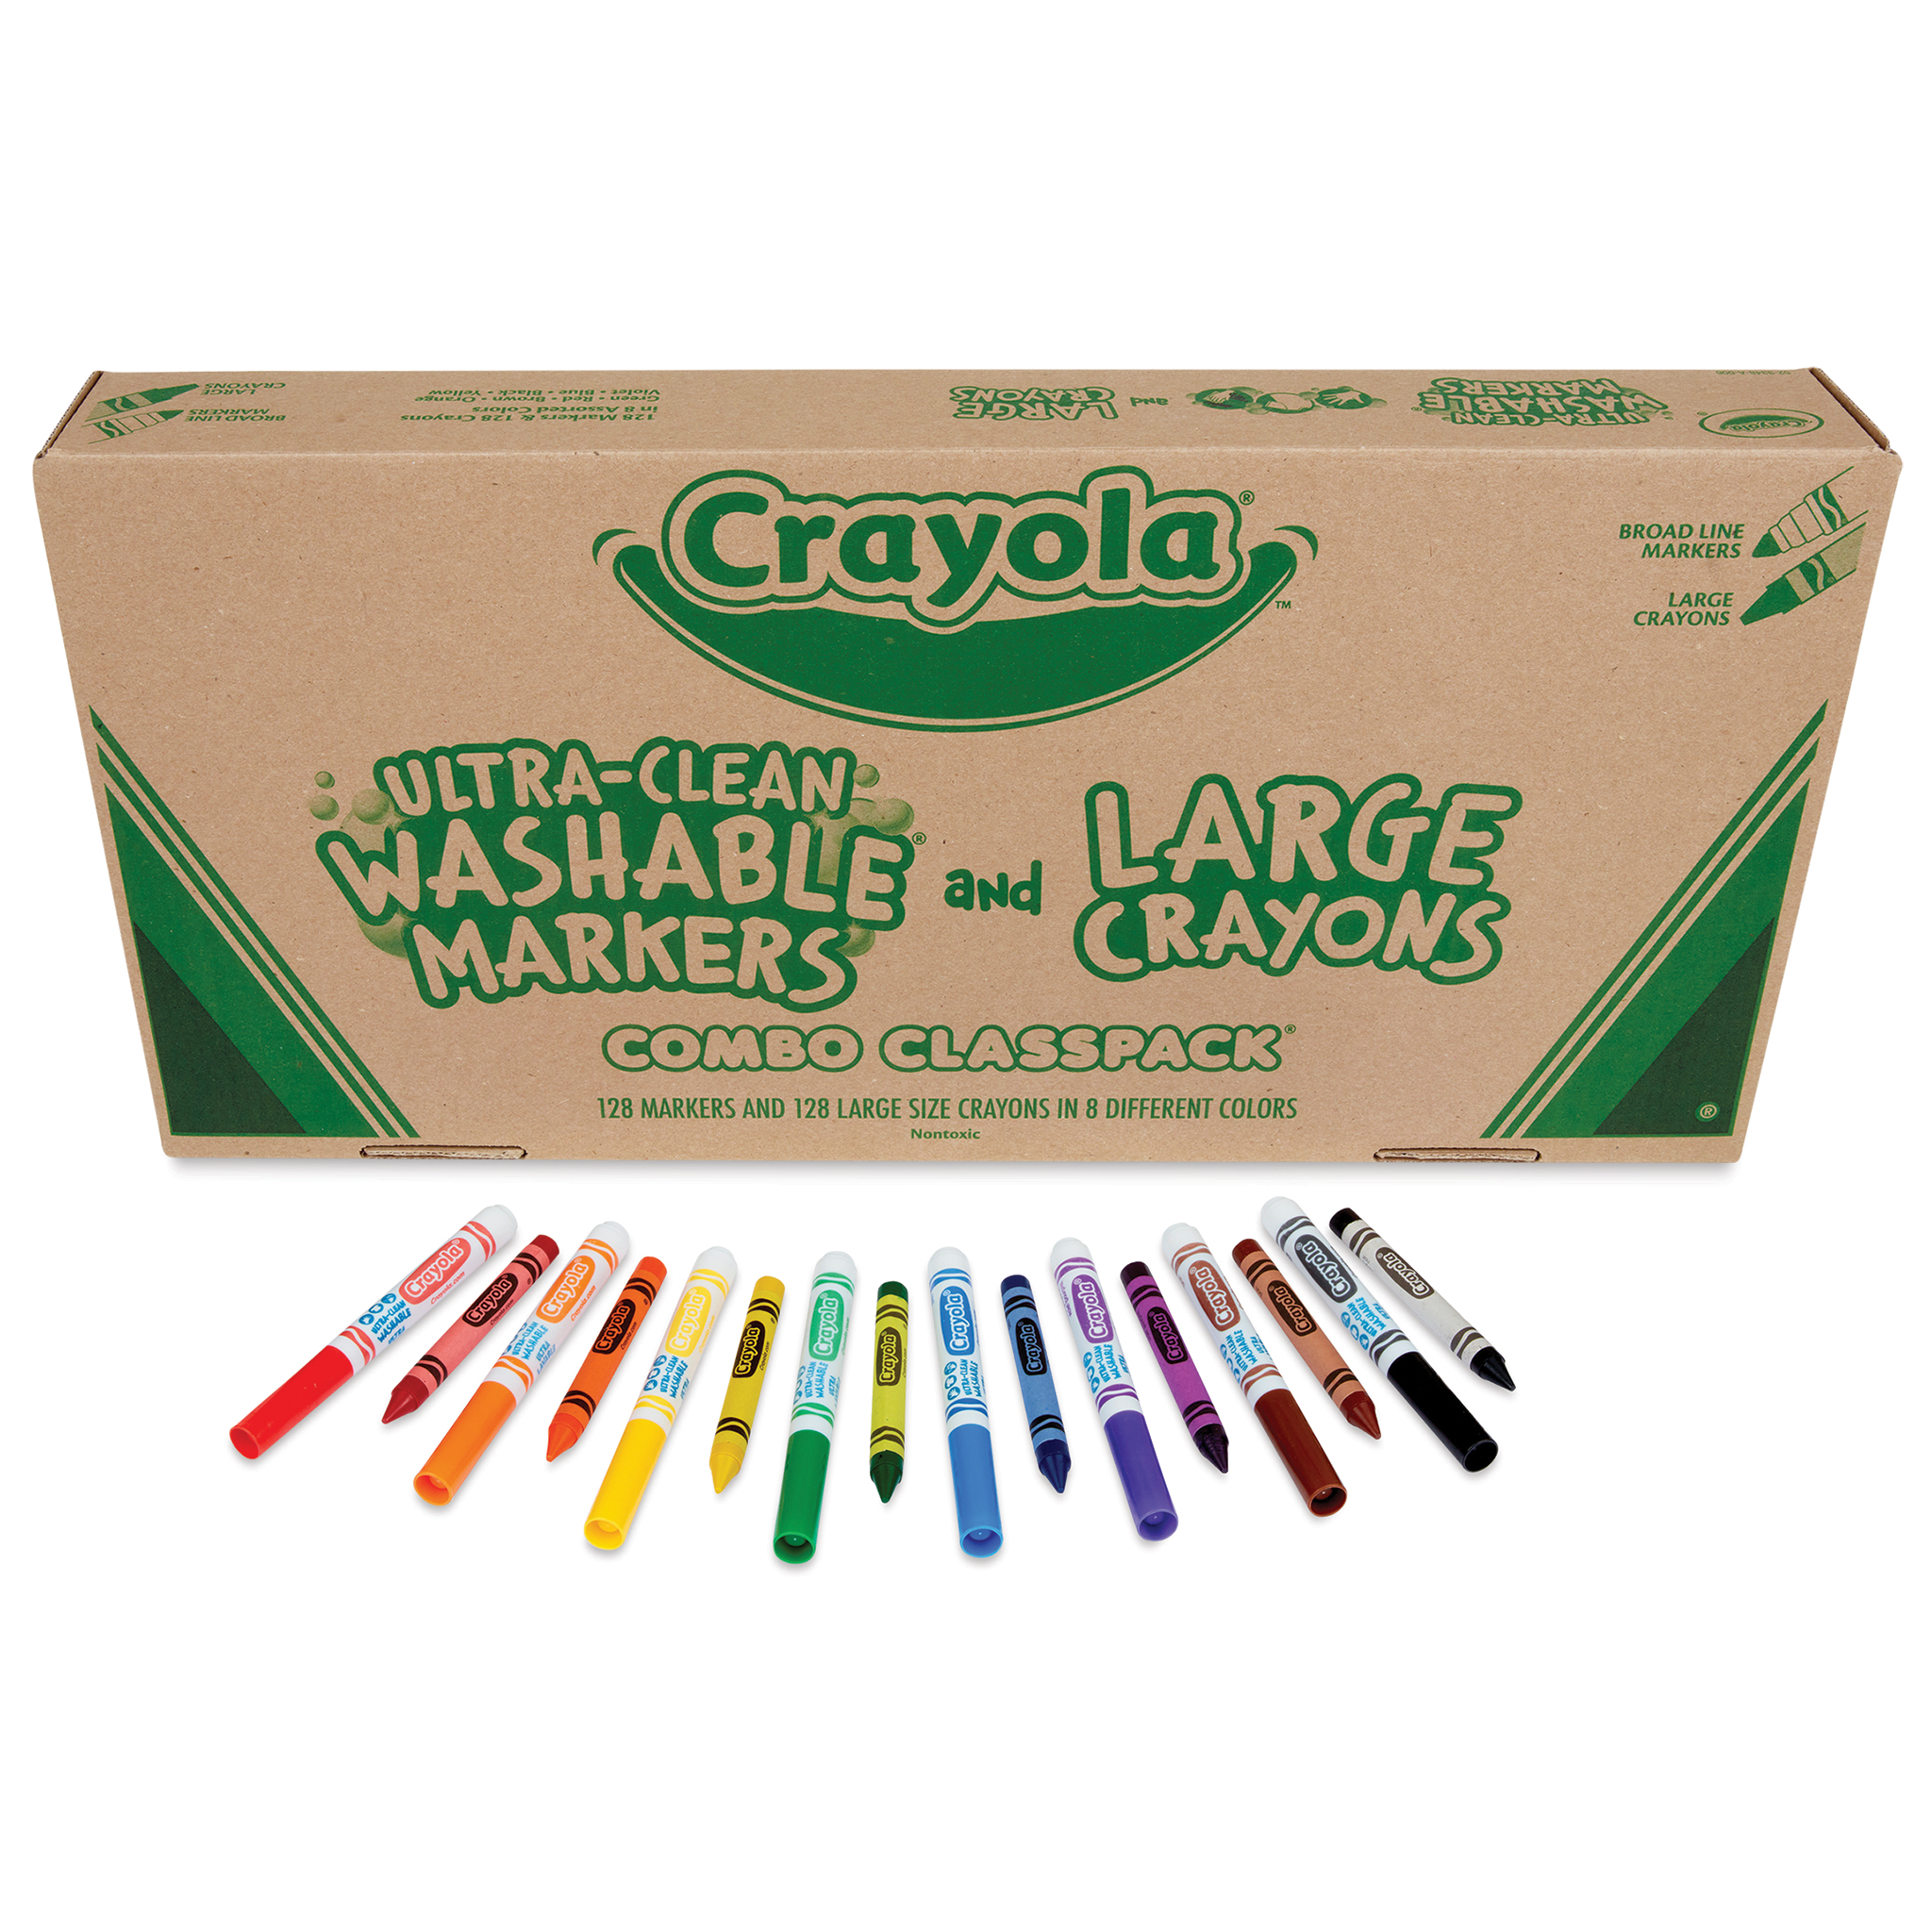 Crayola Combo Classpack - Large Size Crayons and Washable Markers